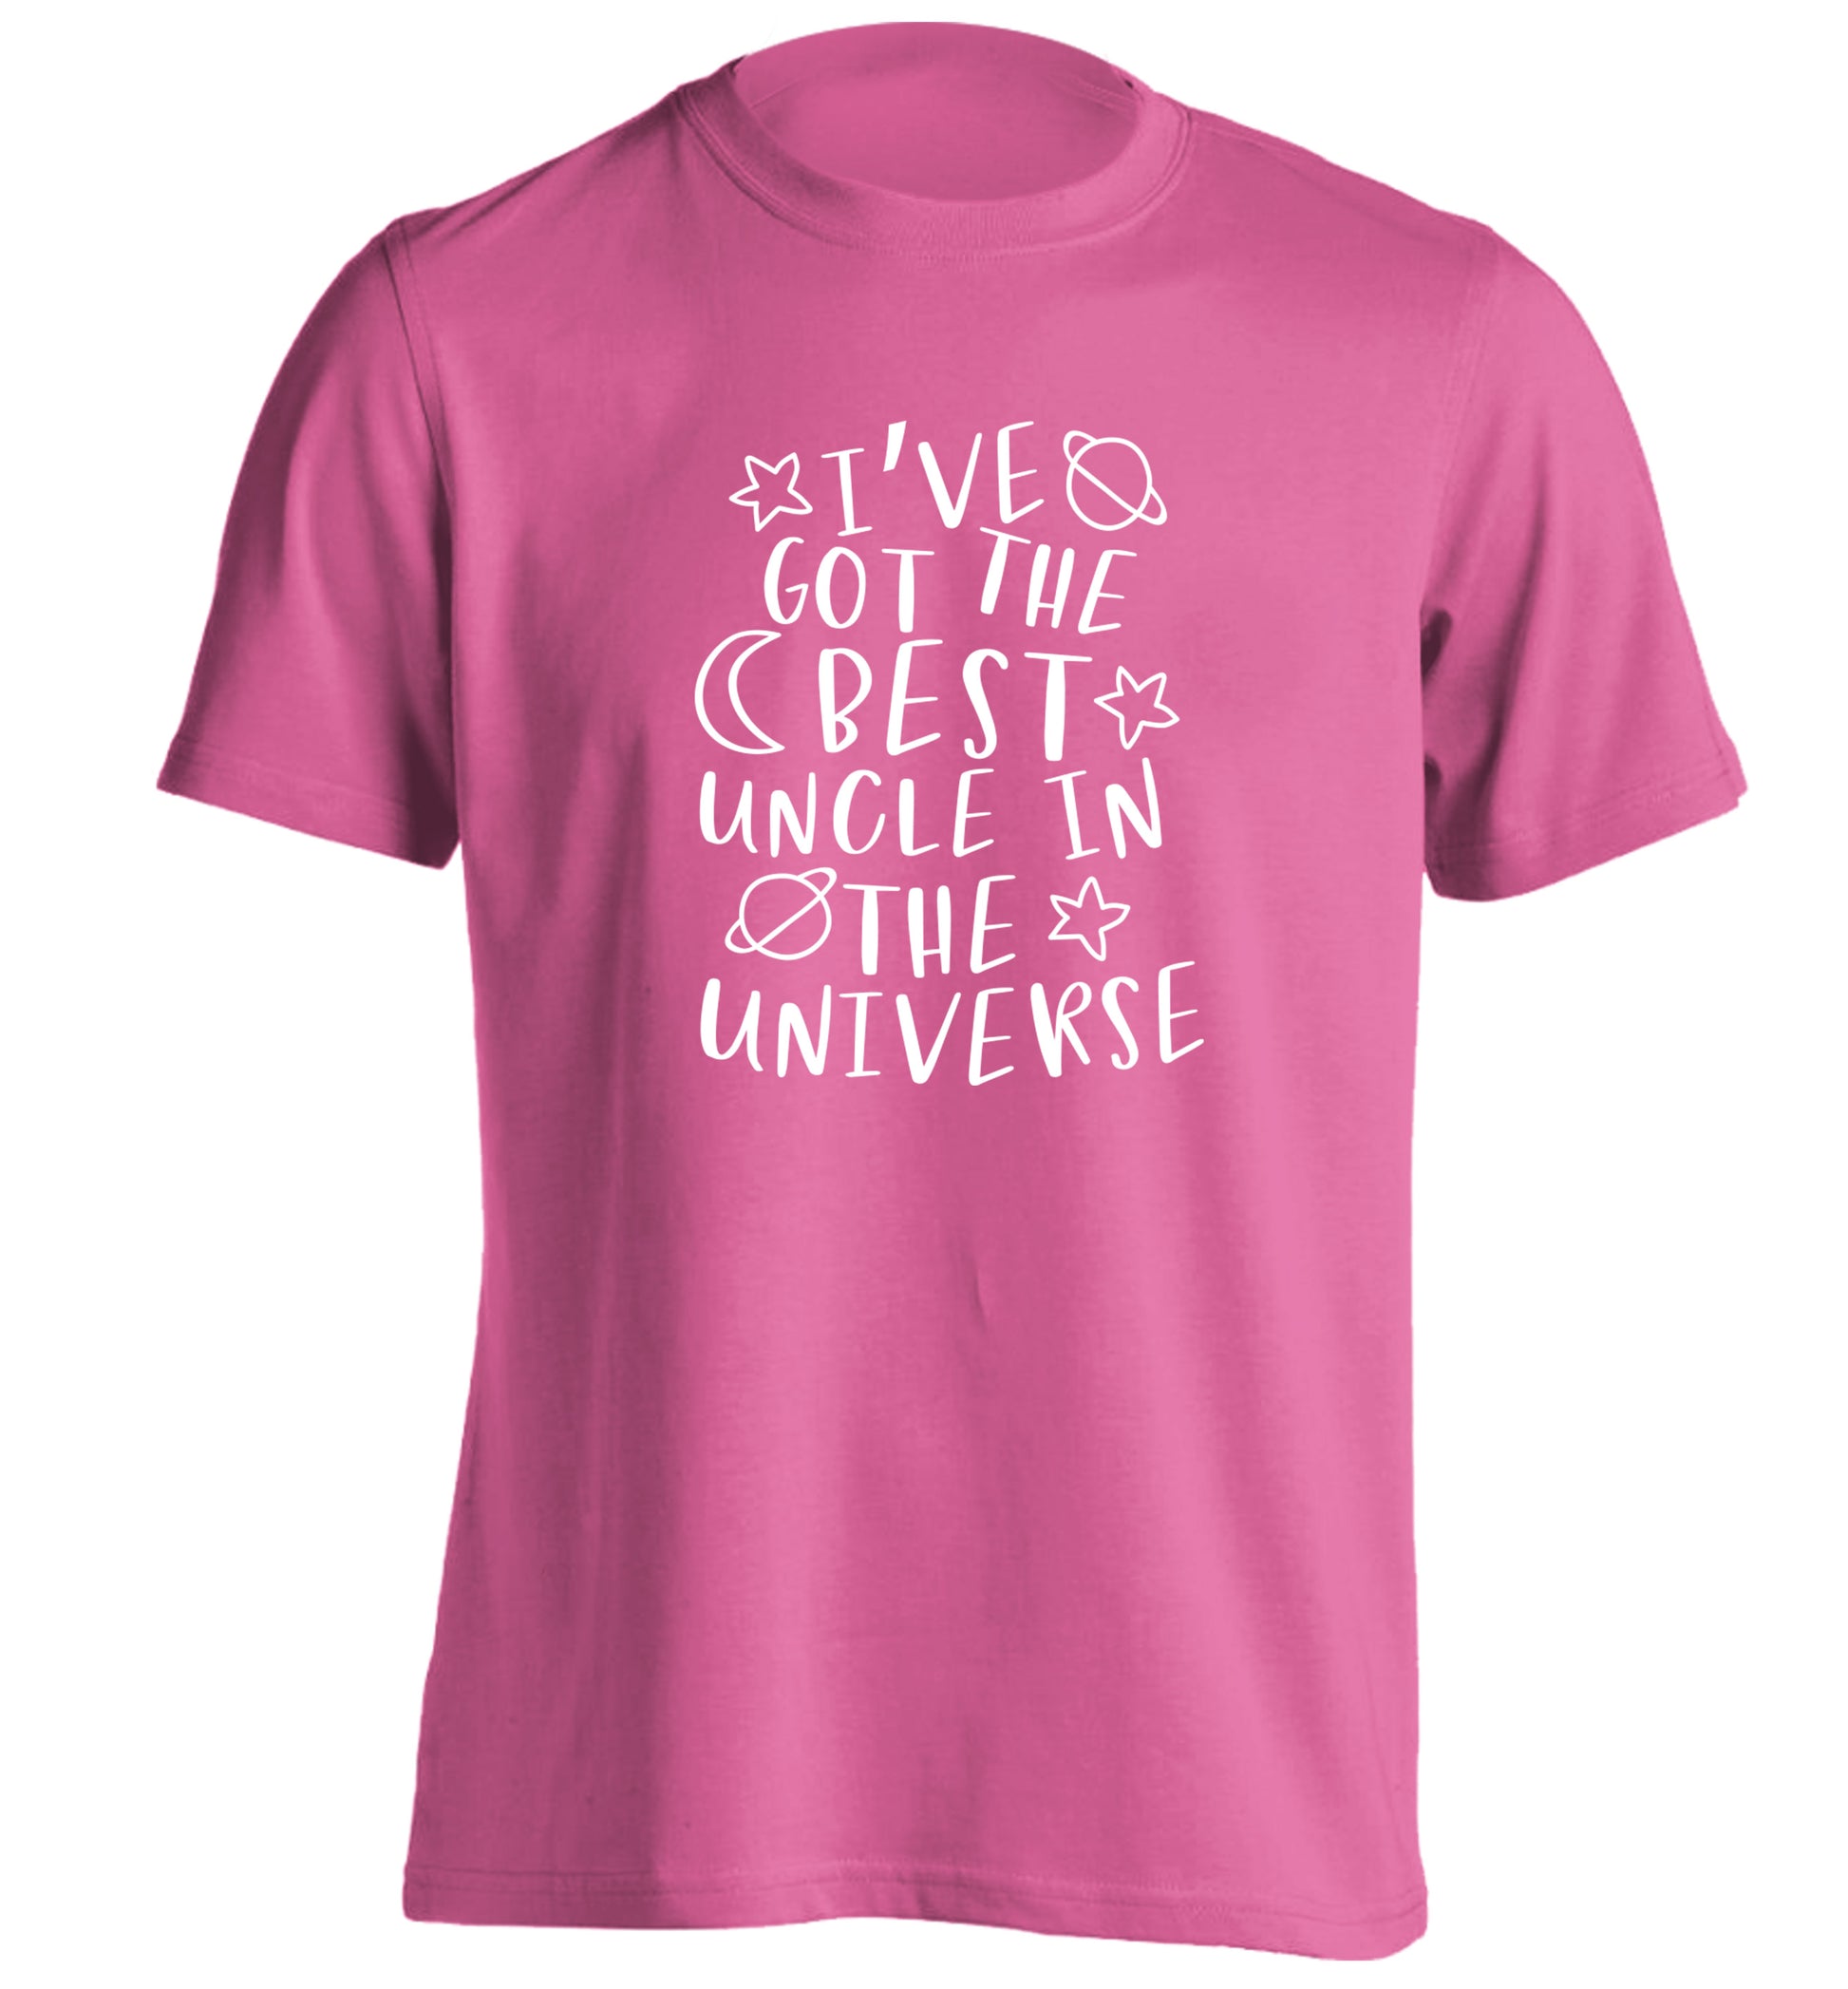 I've got the best uncle in the universe adults unisex pink Tshirt 2XL